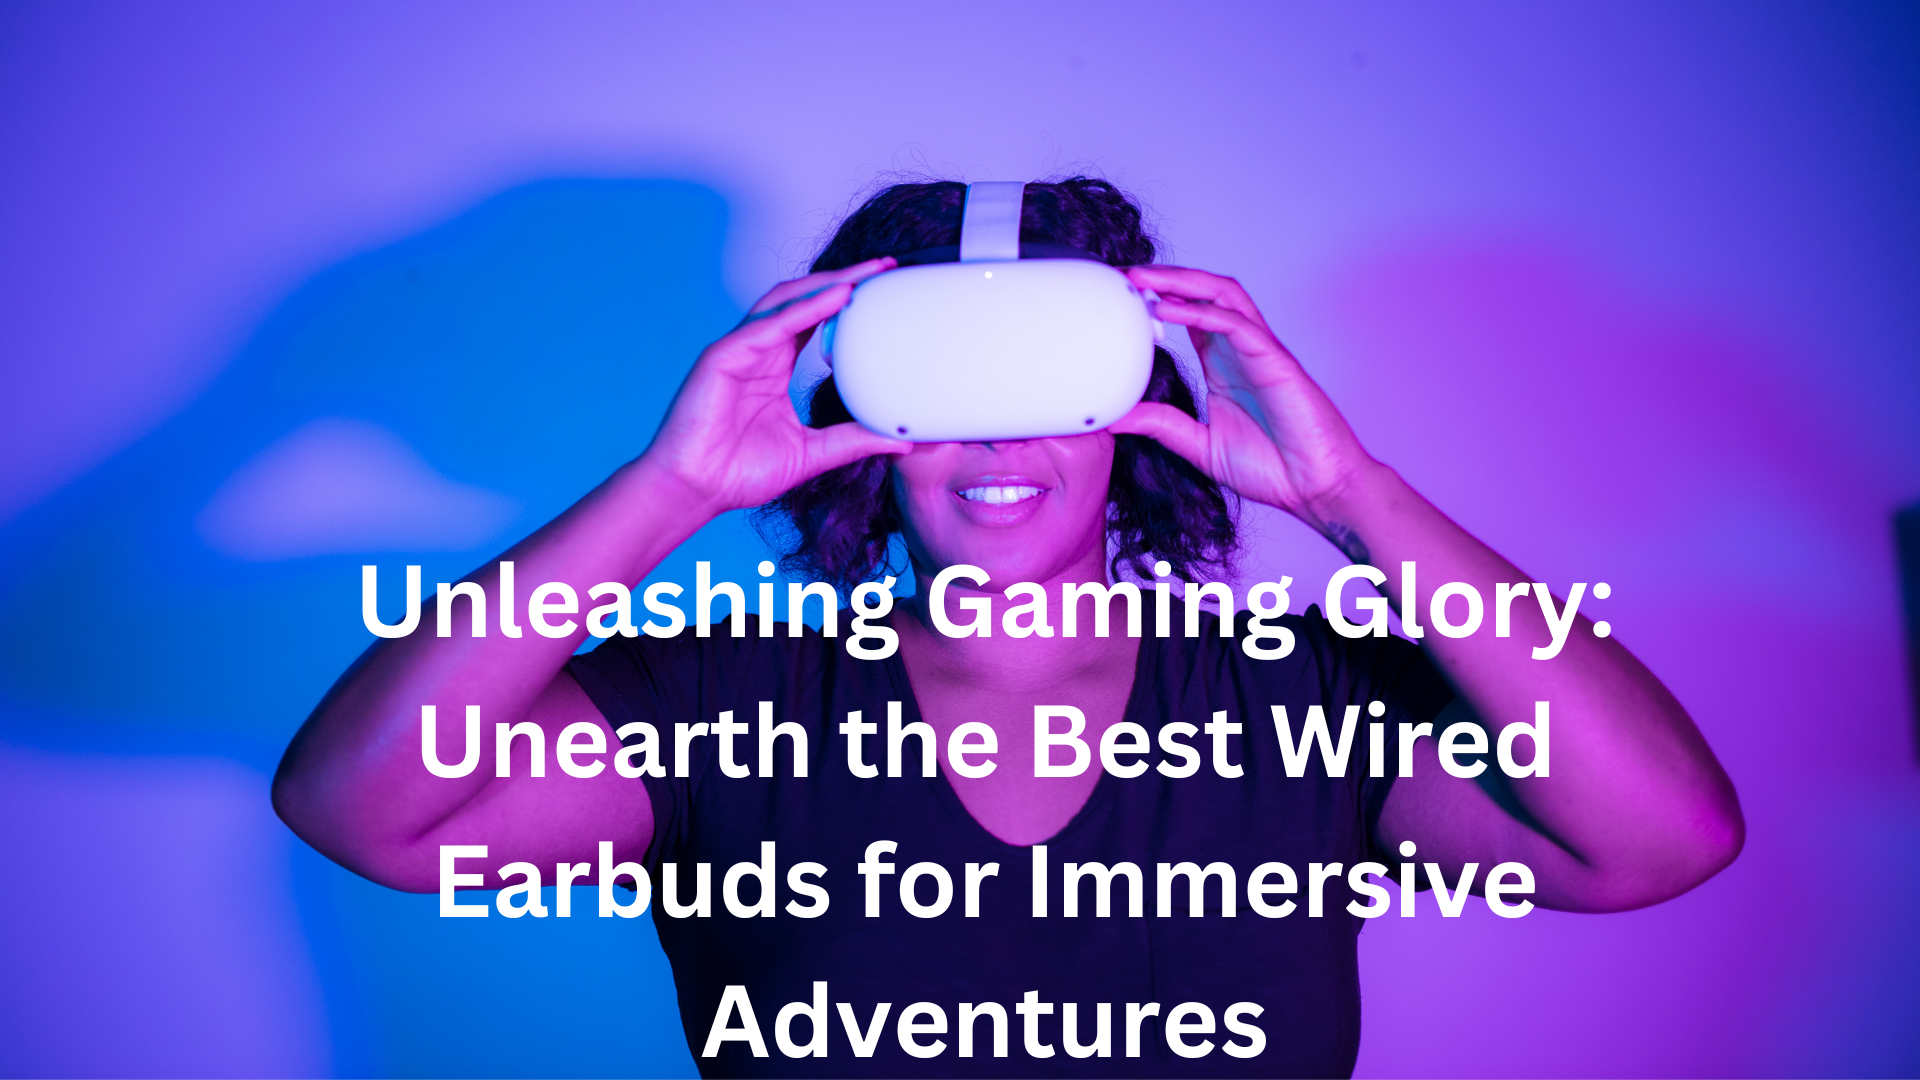 Unleashing Gaming Glory Unearth the Best Wired Earbuds for Immersive Adventures